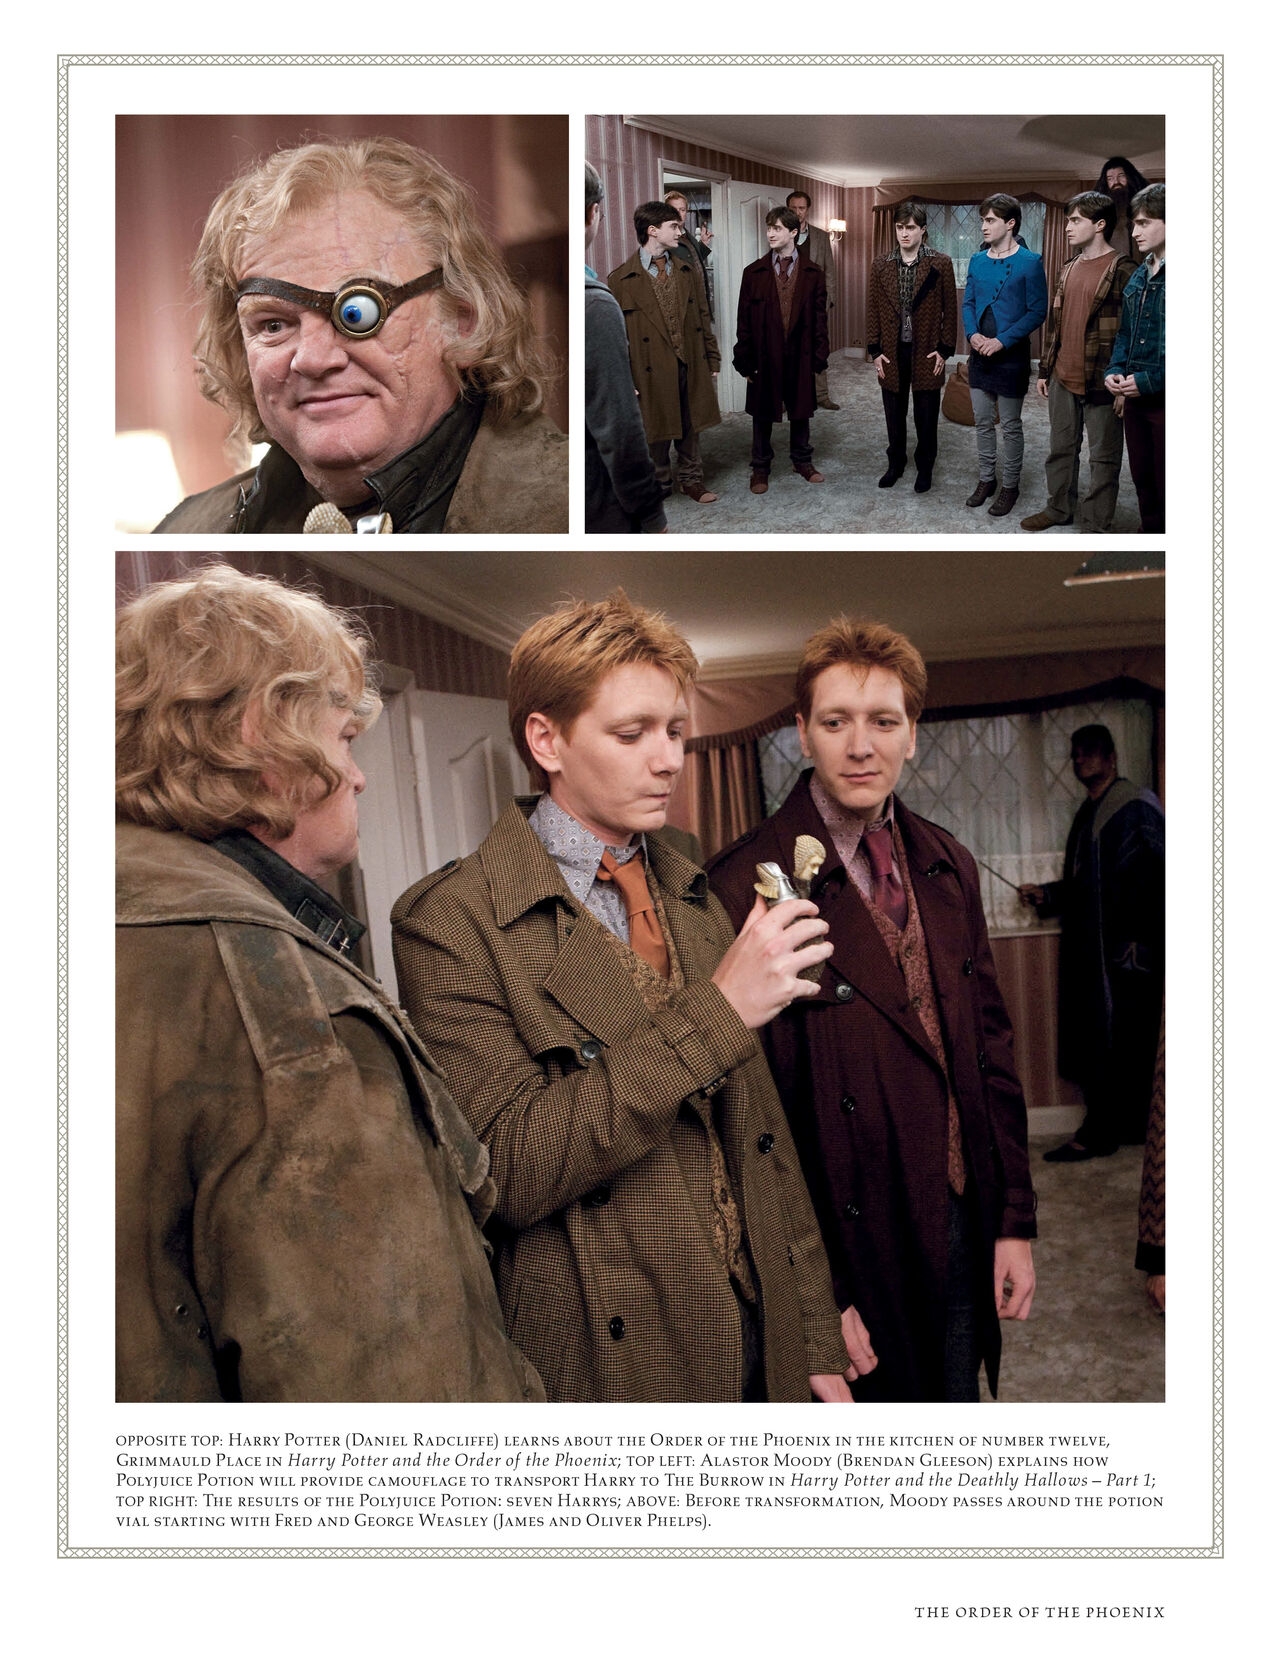 Harry Potter - Film Vault v08 - The Order of the Phoenix and Dark Forces 35